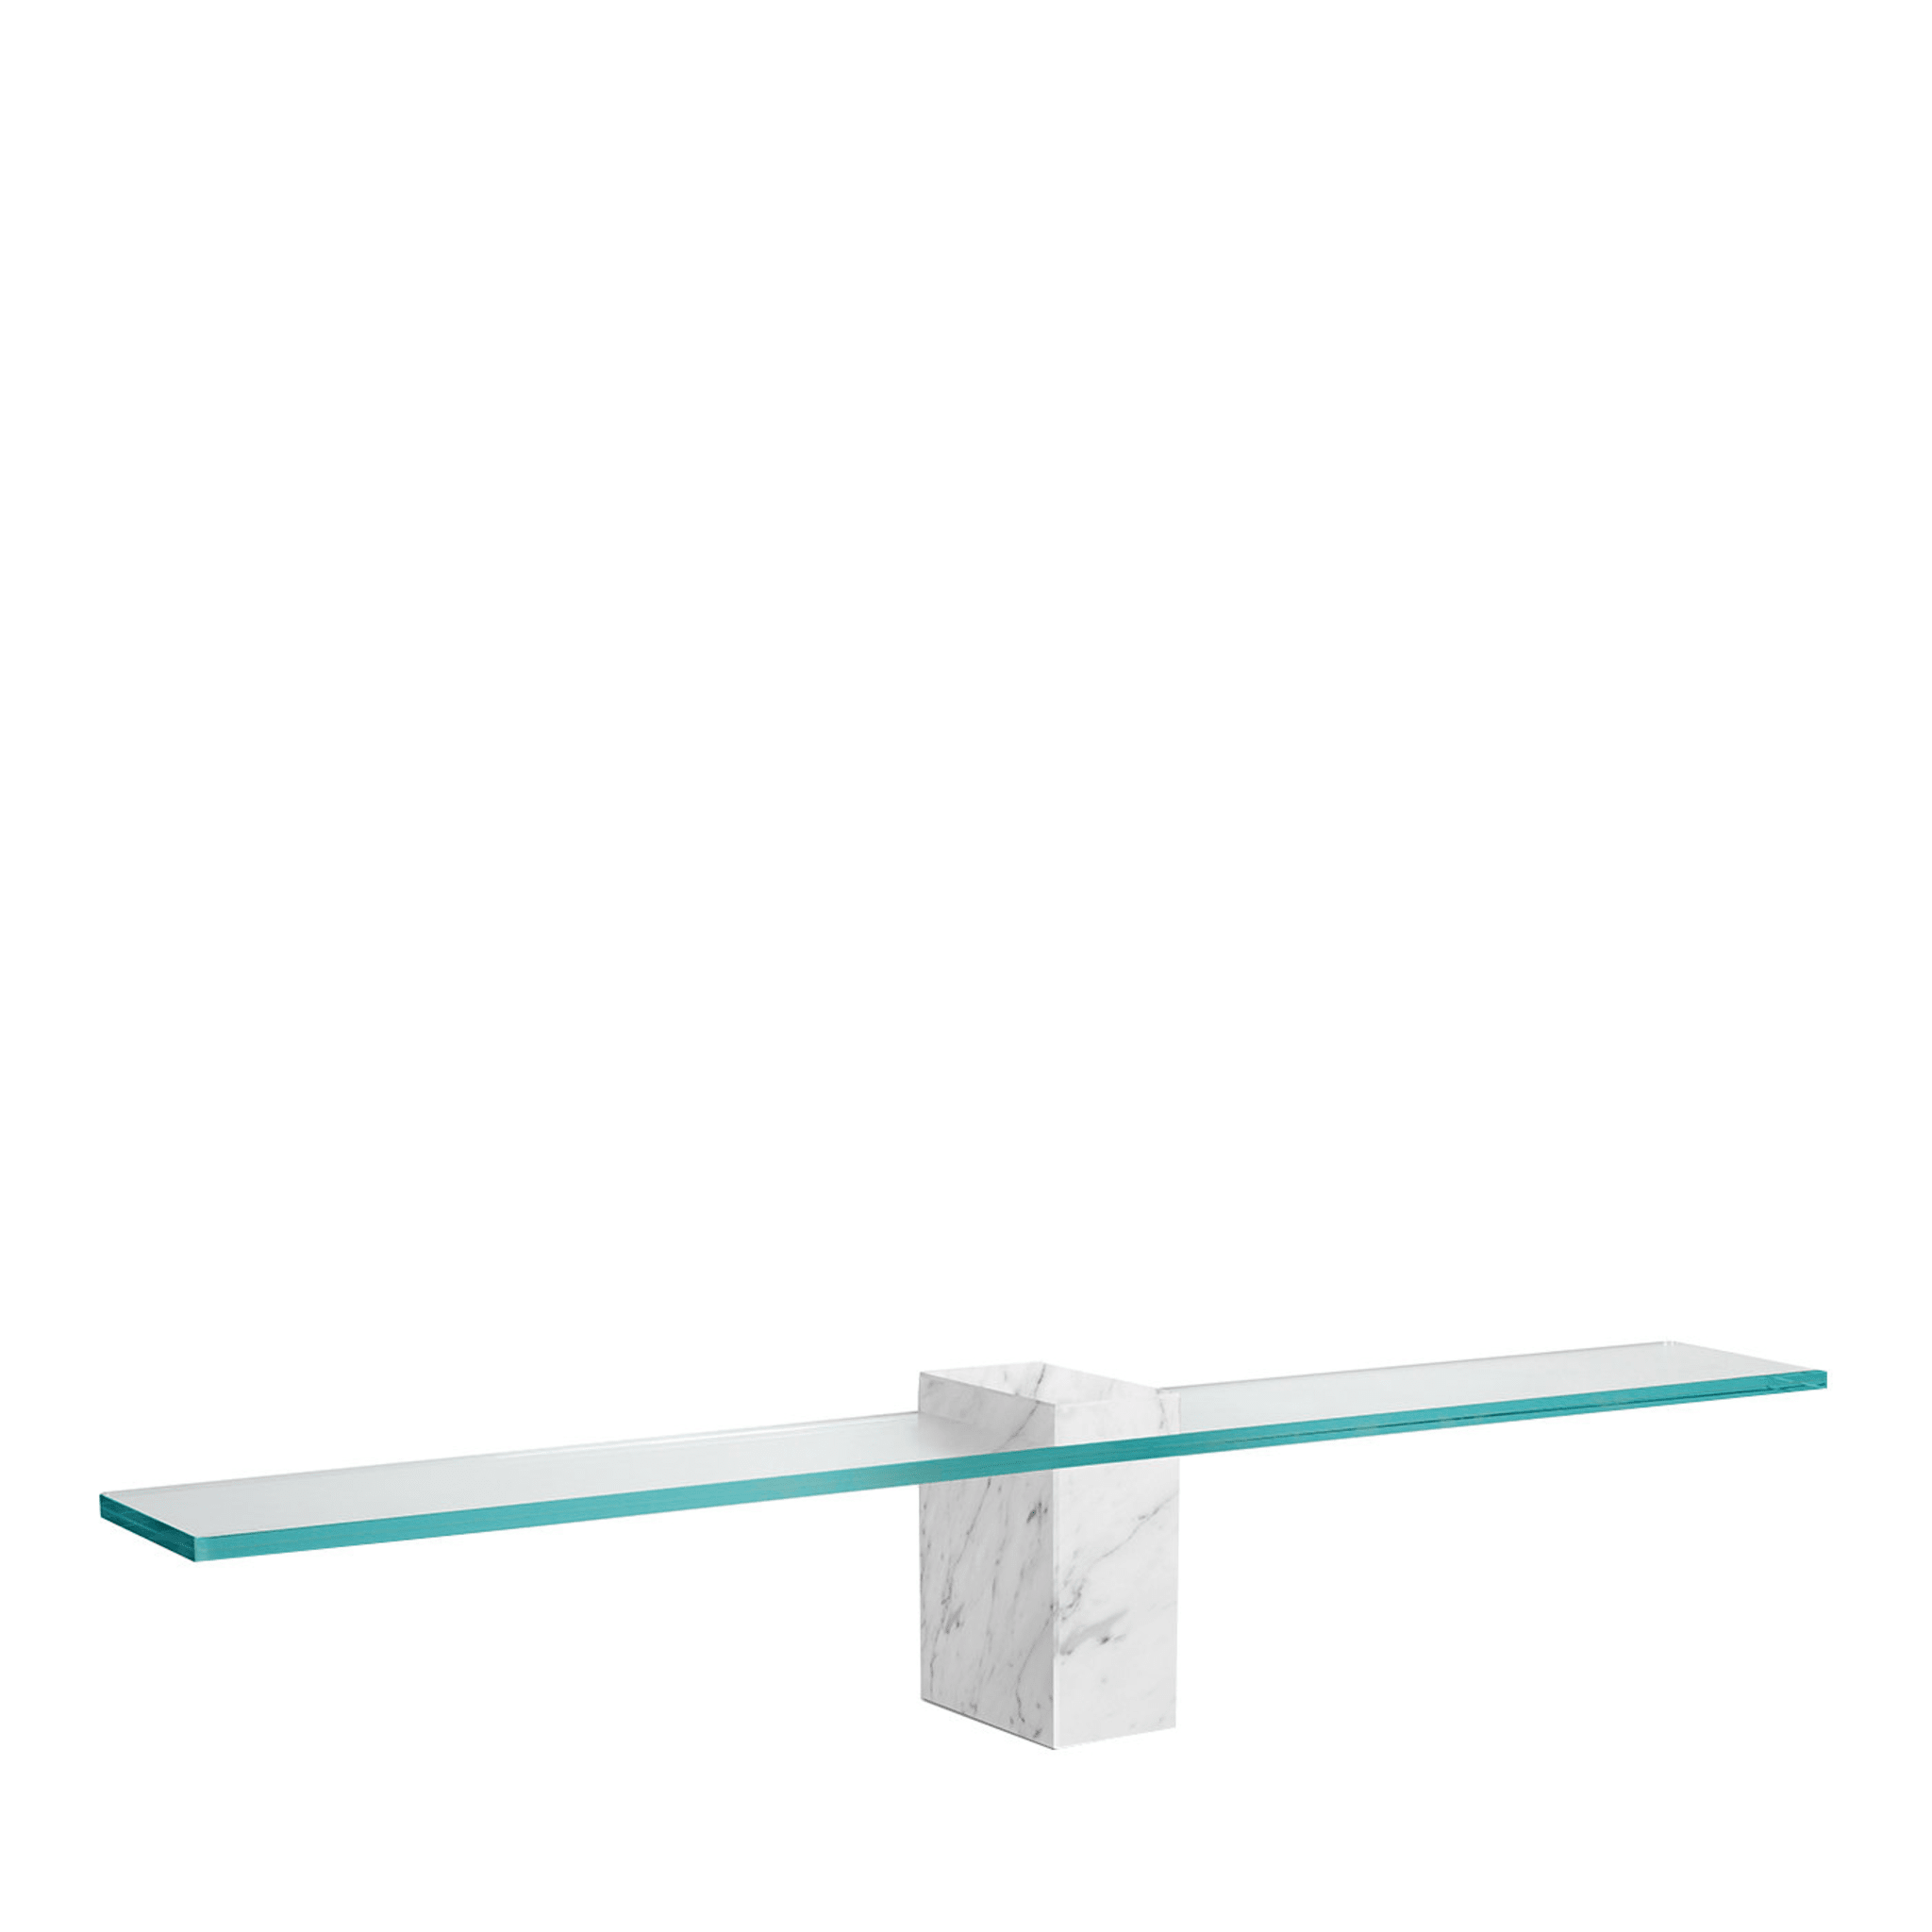 Equilibrio Bench - Main view